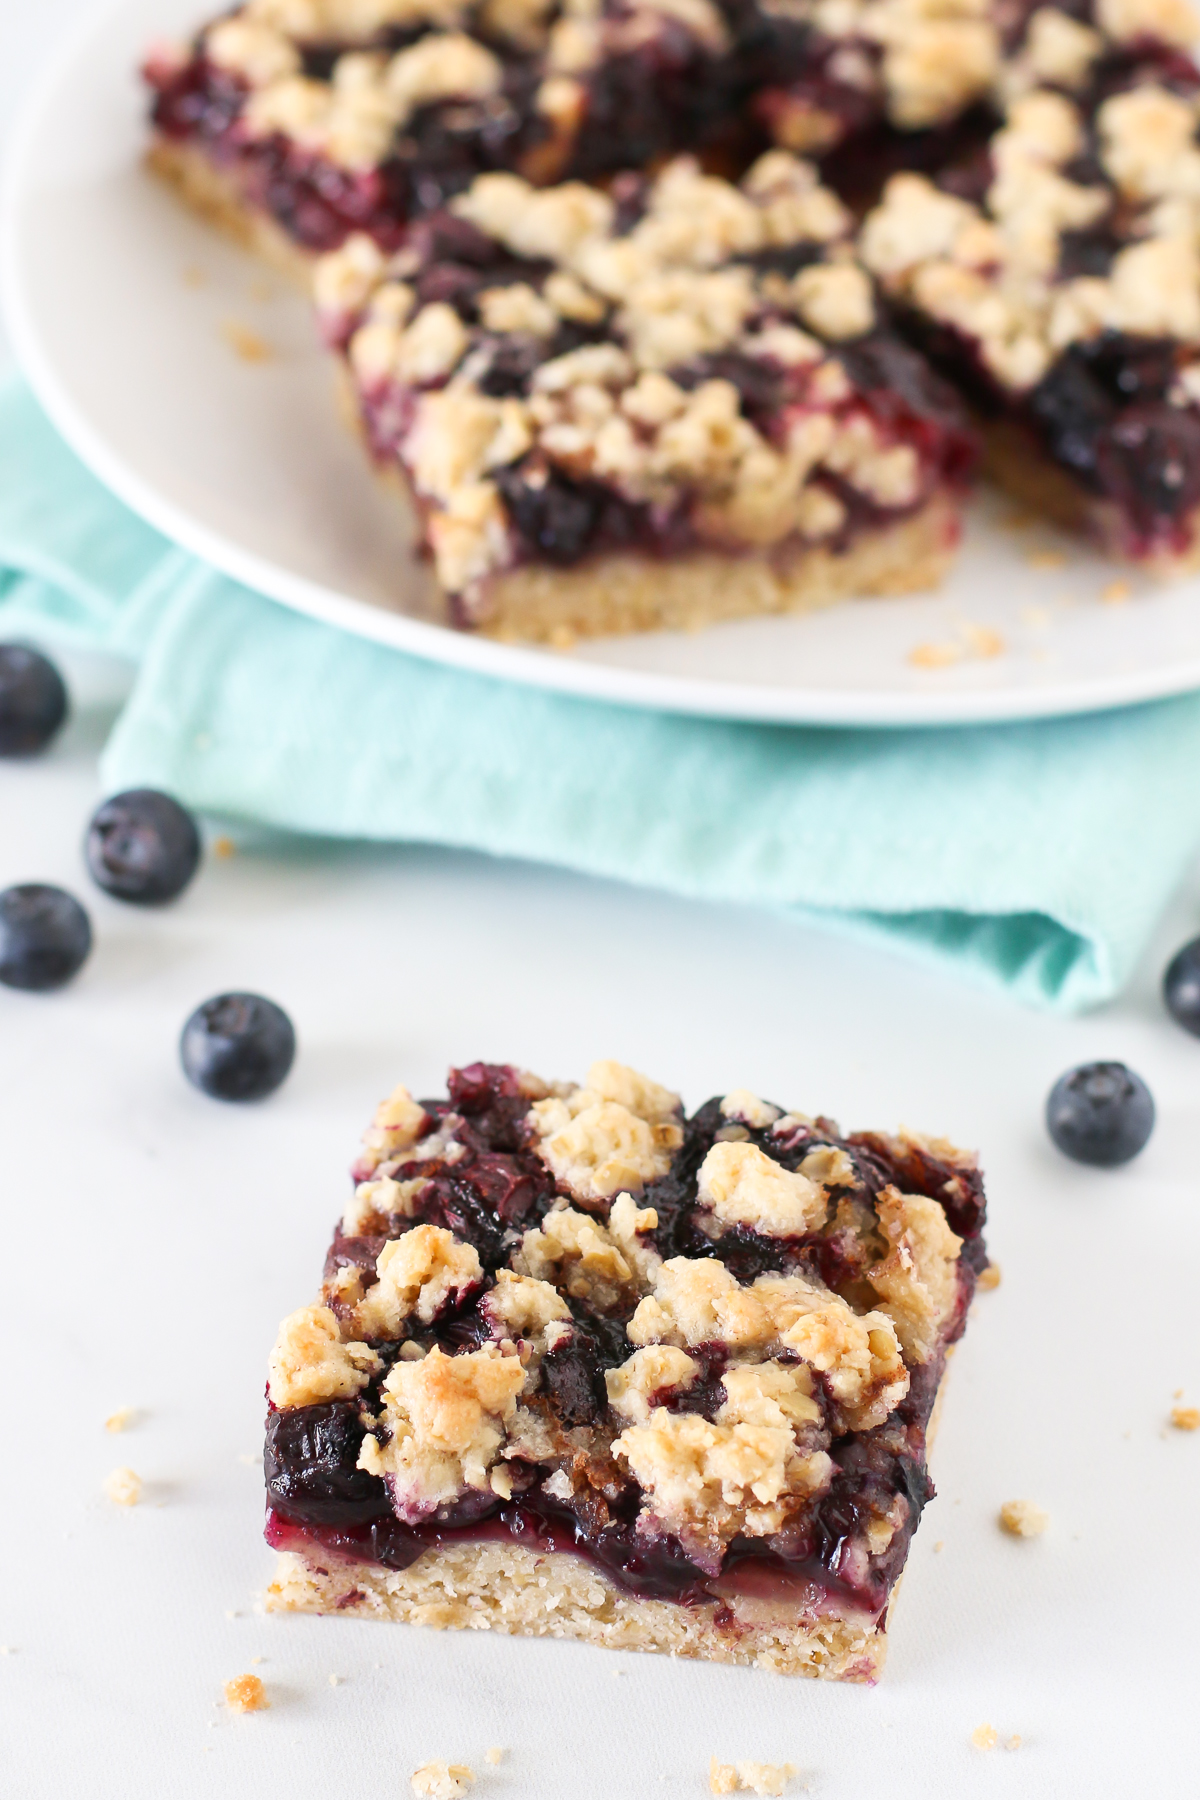 Gluten Free Vegan Blueberry Crumb Bars. Layers of soft, oat crumble and juicy, sweet blueberries with a touch of cinnamon. 